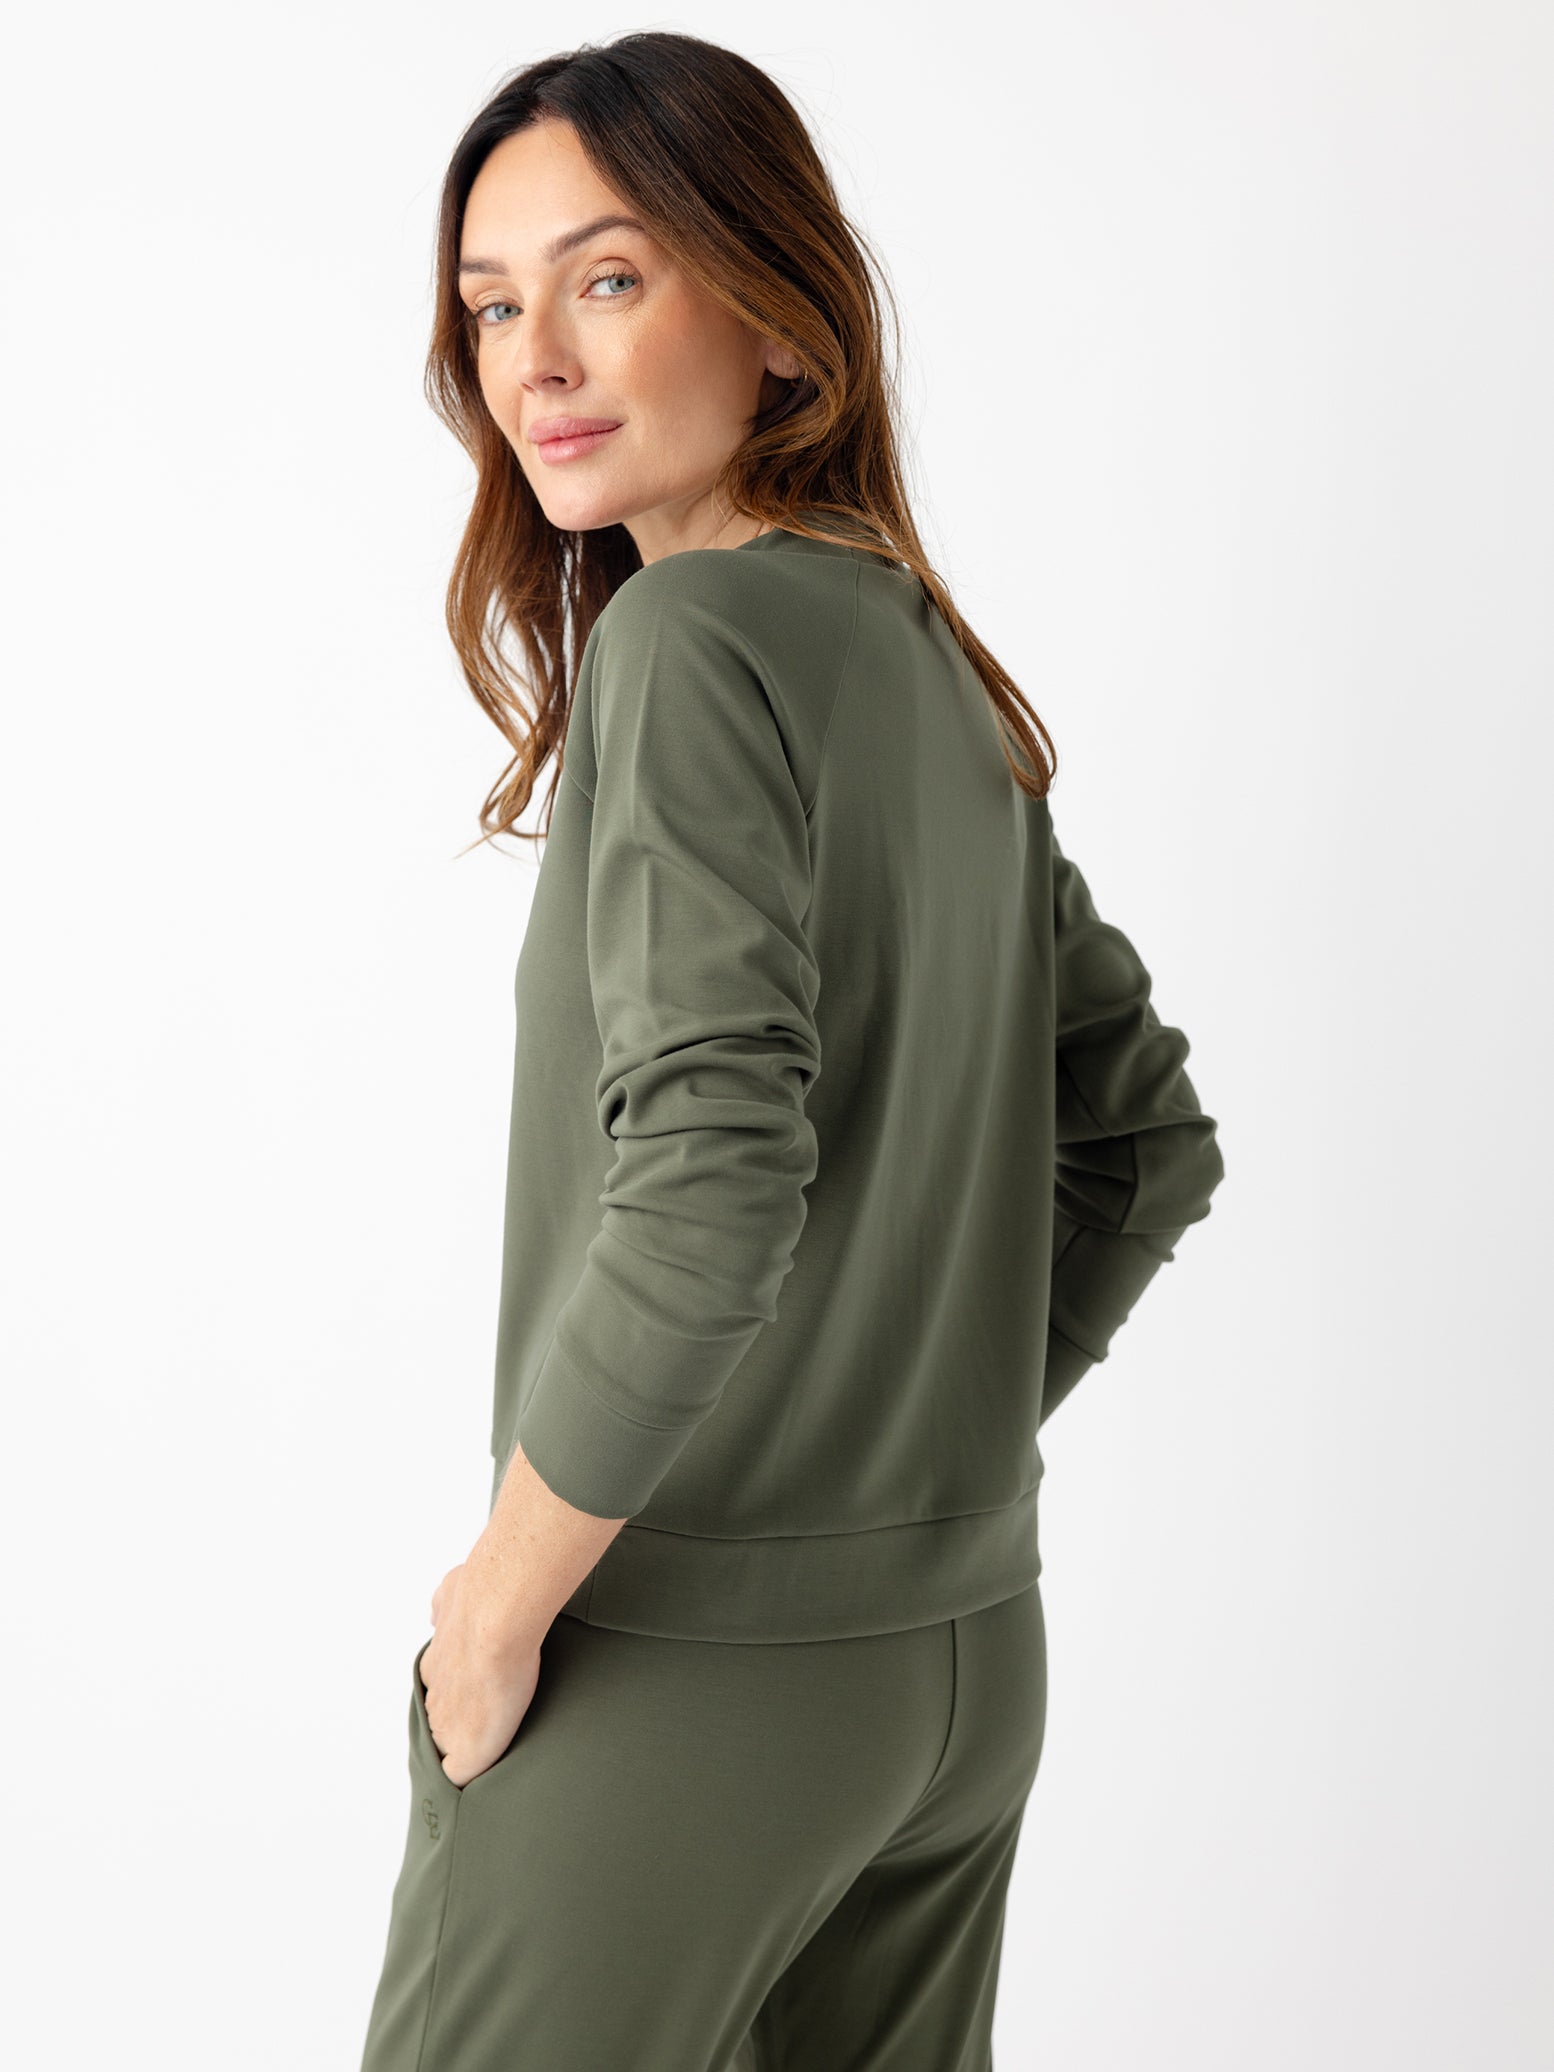 Back of woman in olive crewneck with white background 